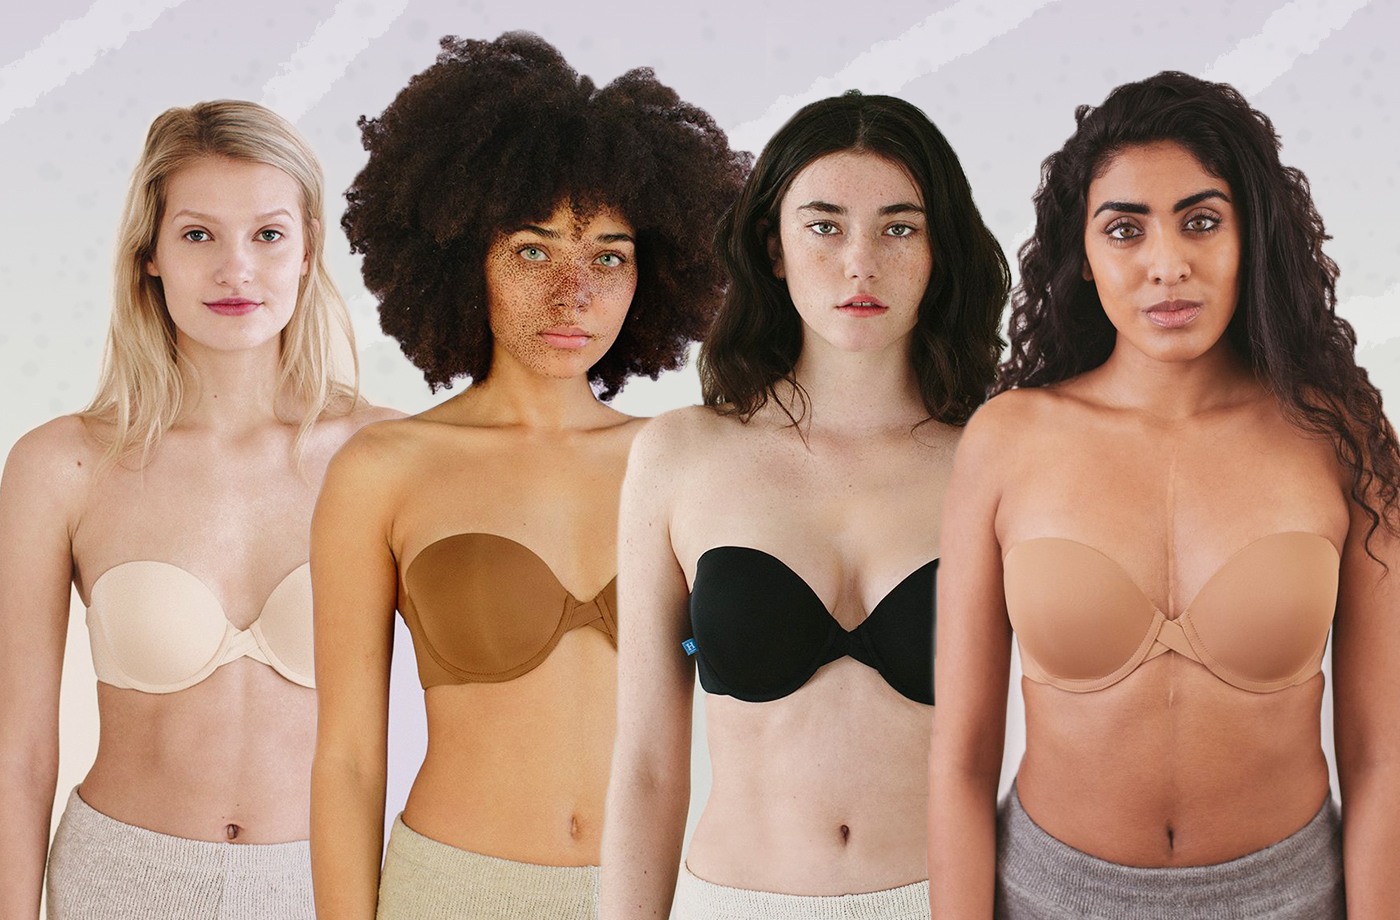 Where to buy strapless bras that women actually swear by